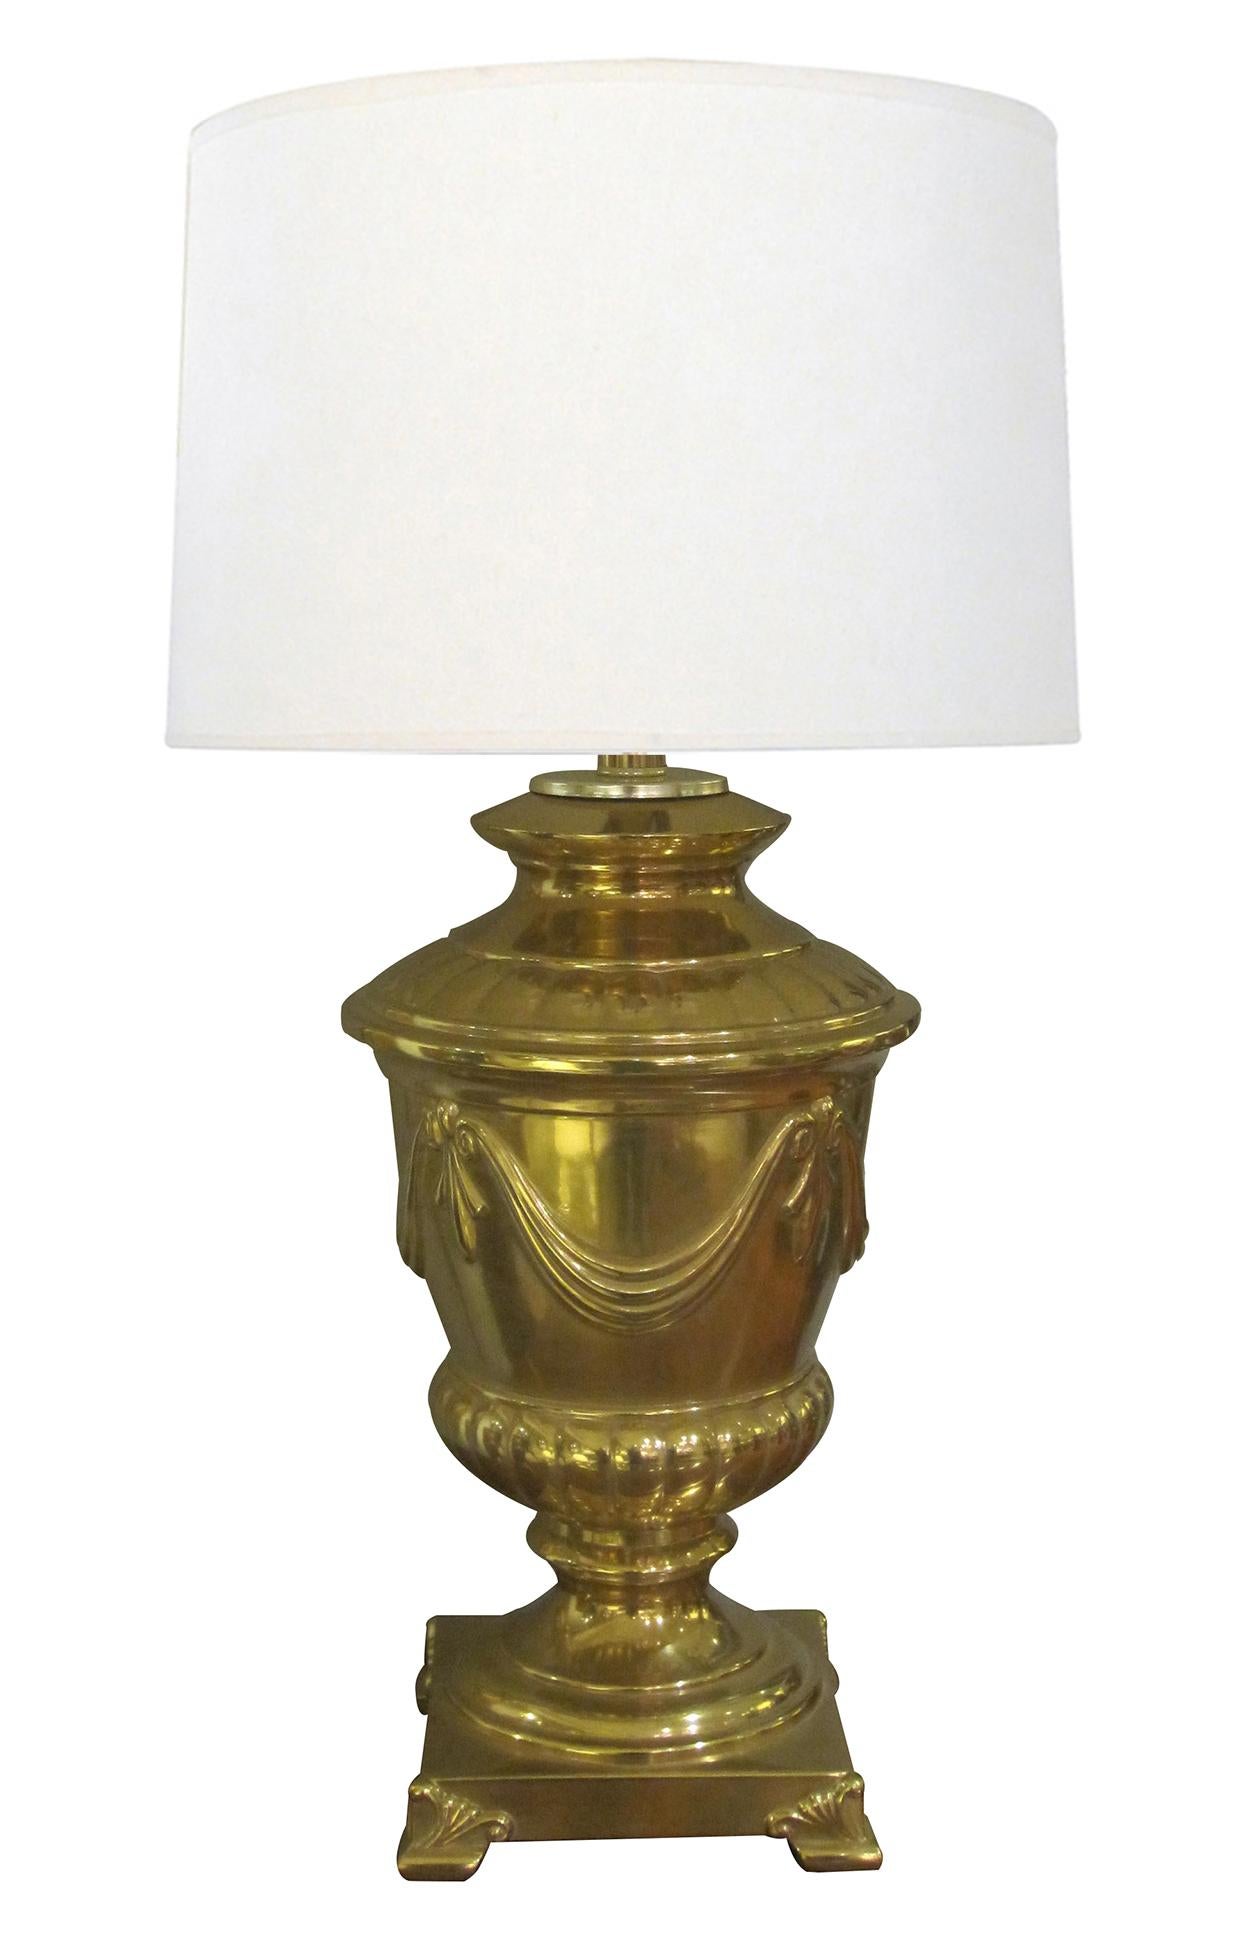 each heavy lamp of neoclassical campagna form adorned with draped swags all raised on anthemion feet